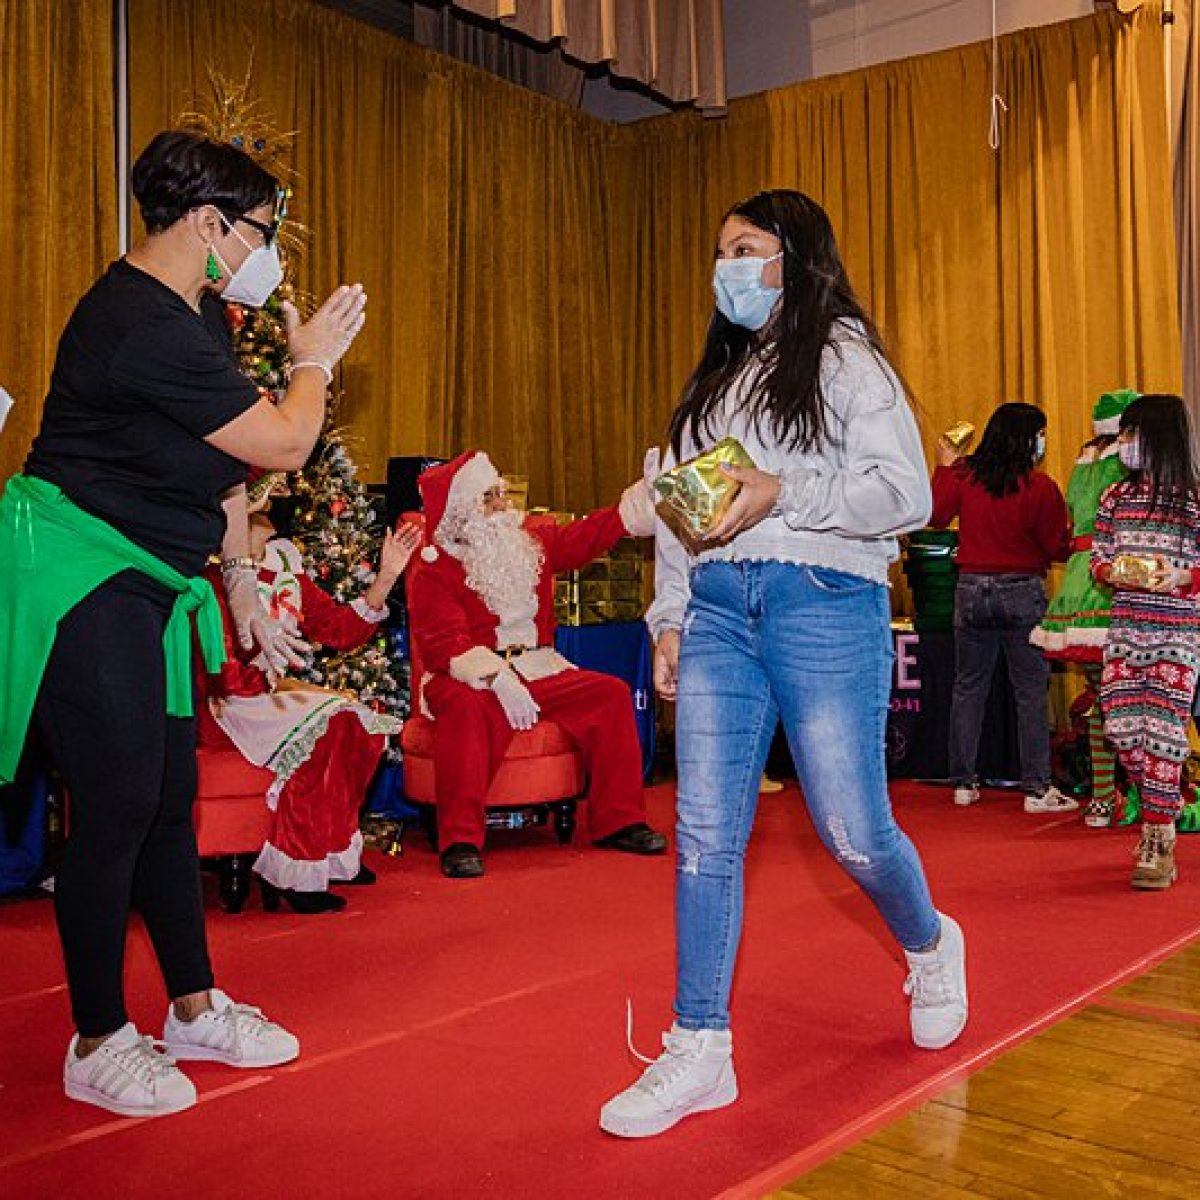 Milwaukee Students Receive Holiday Magic from Daisie Foundation Initiative